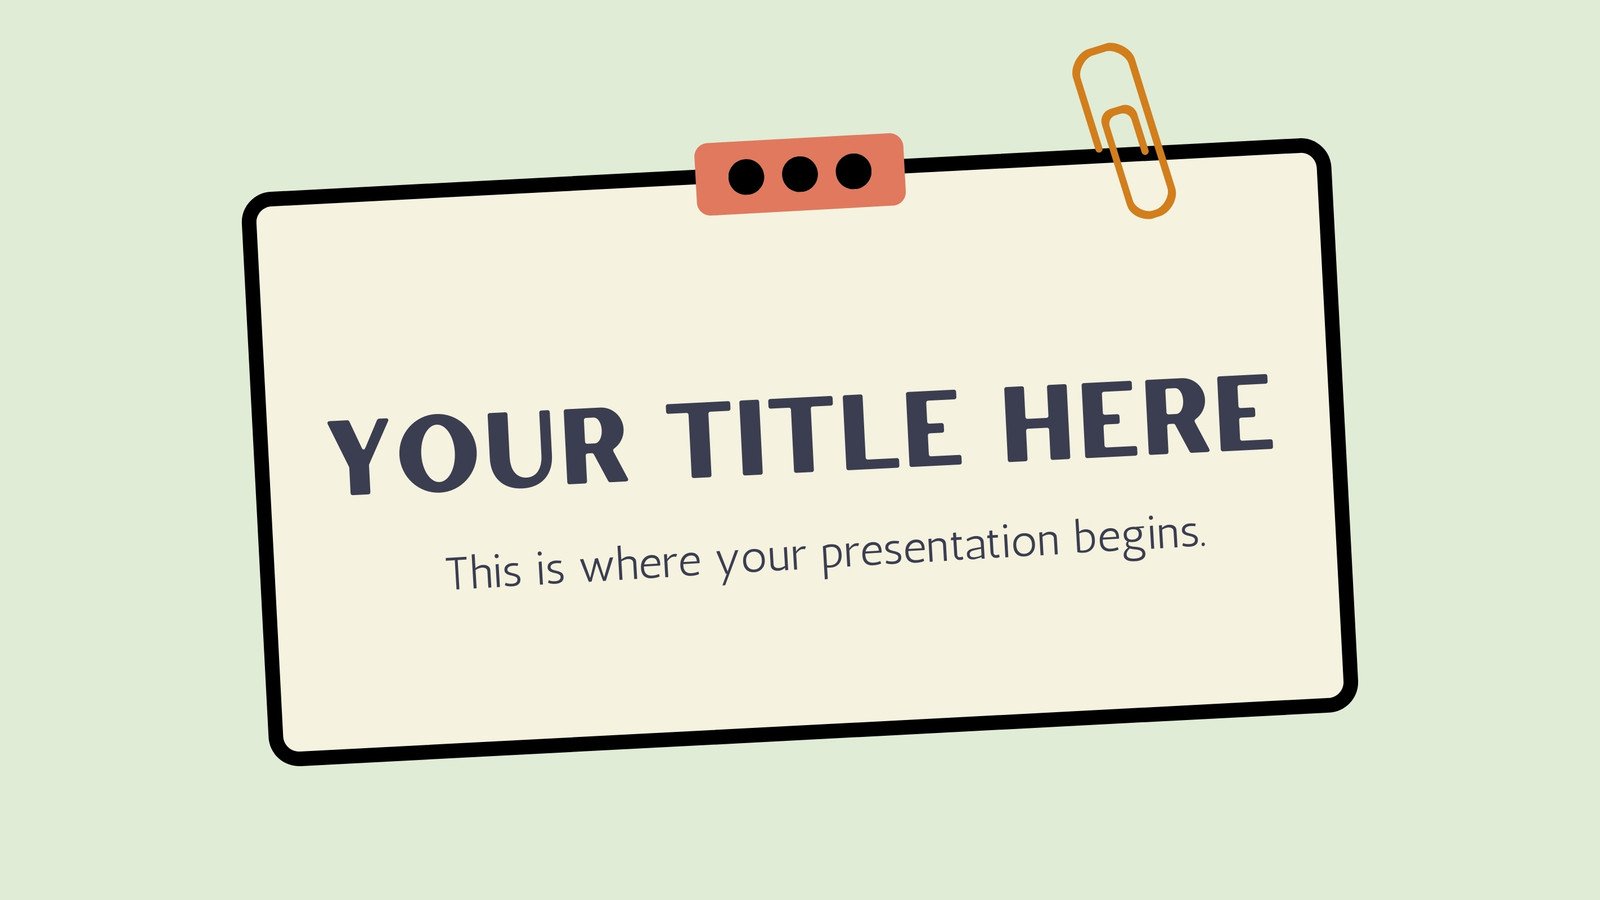 Free education presentation templates you can edit | Canva